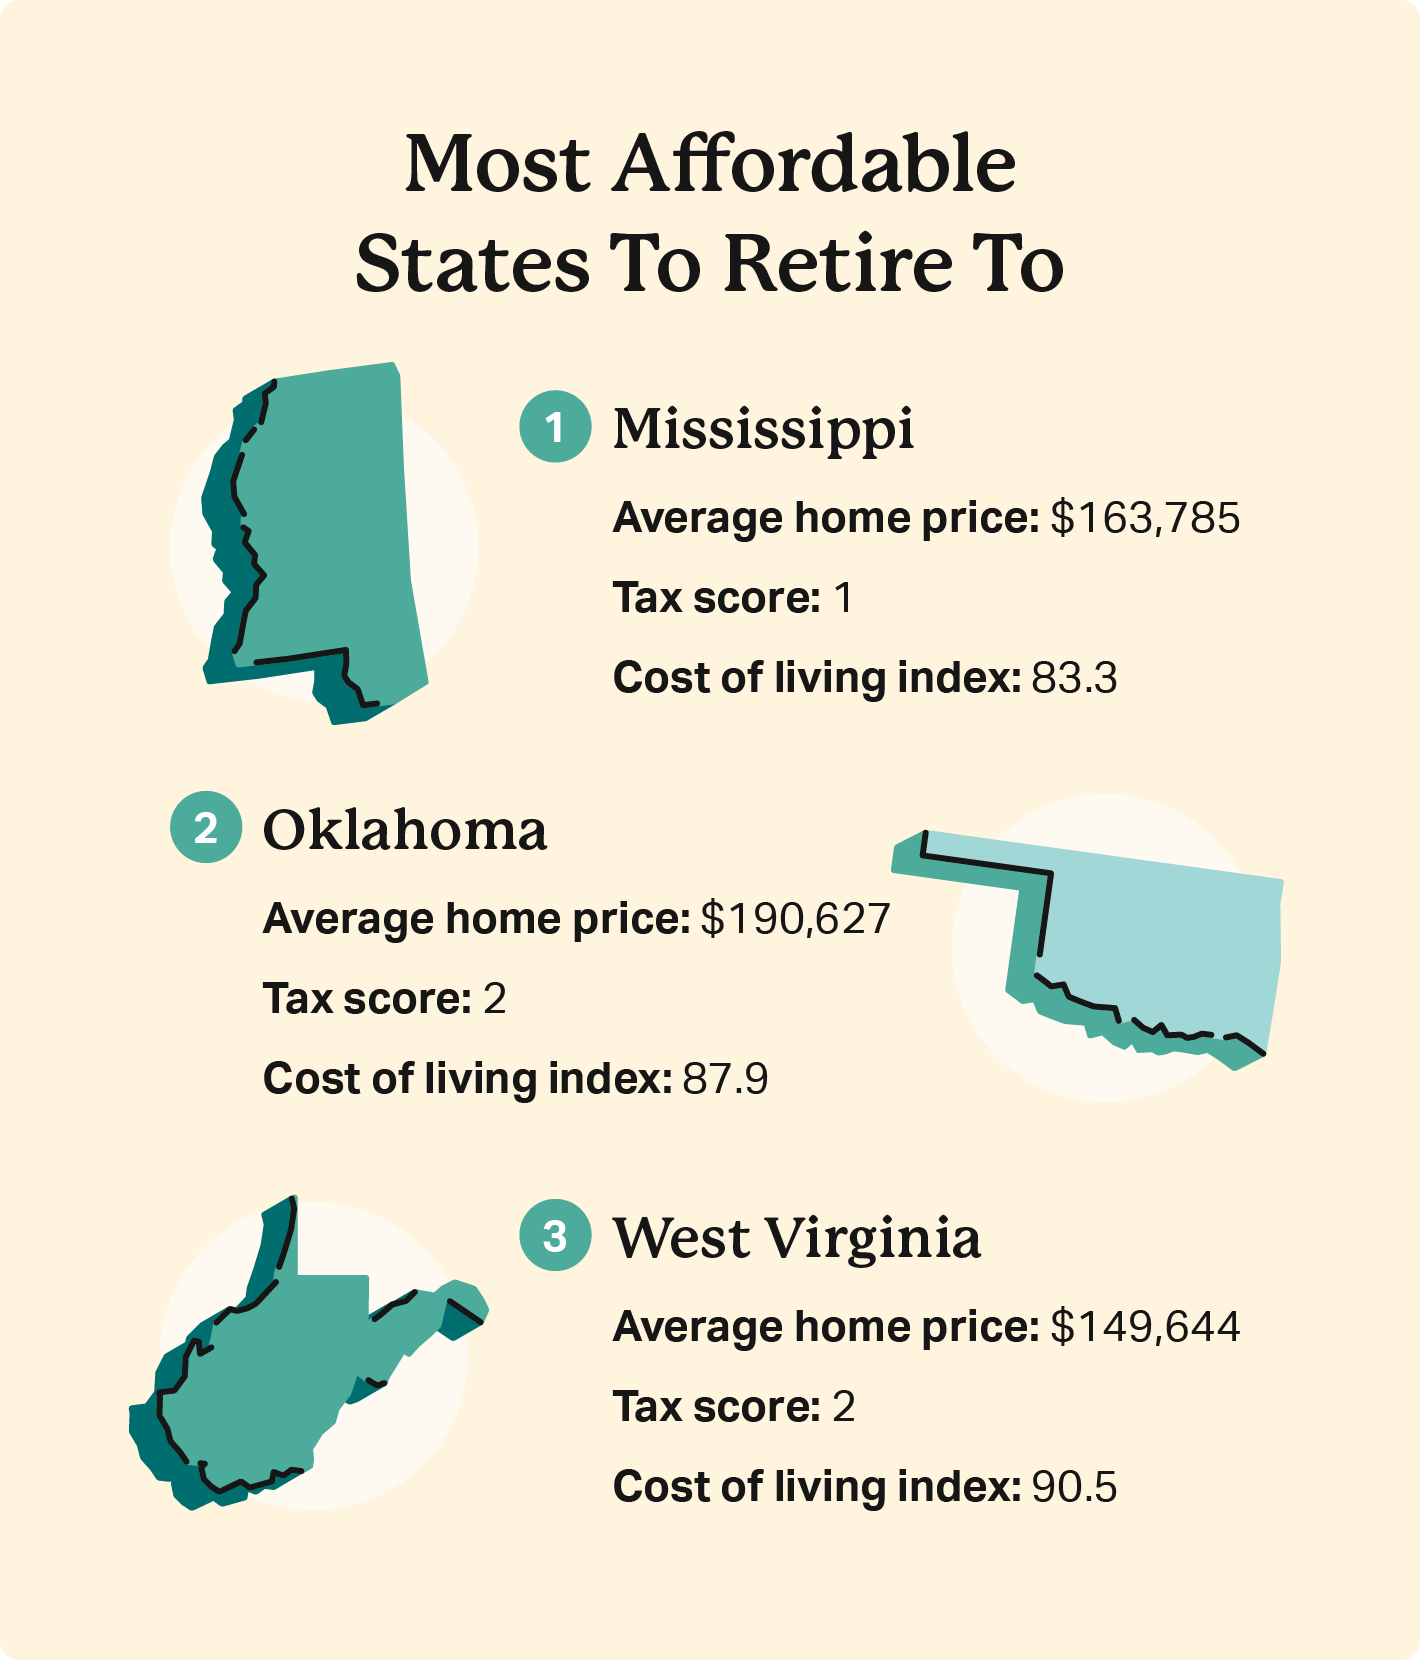 A graphic shows the most affordable states to retire to: Mississippi, Oklahoma, and West Virginia.